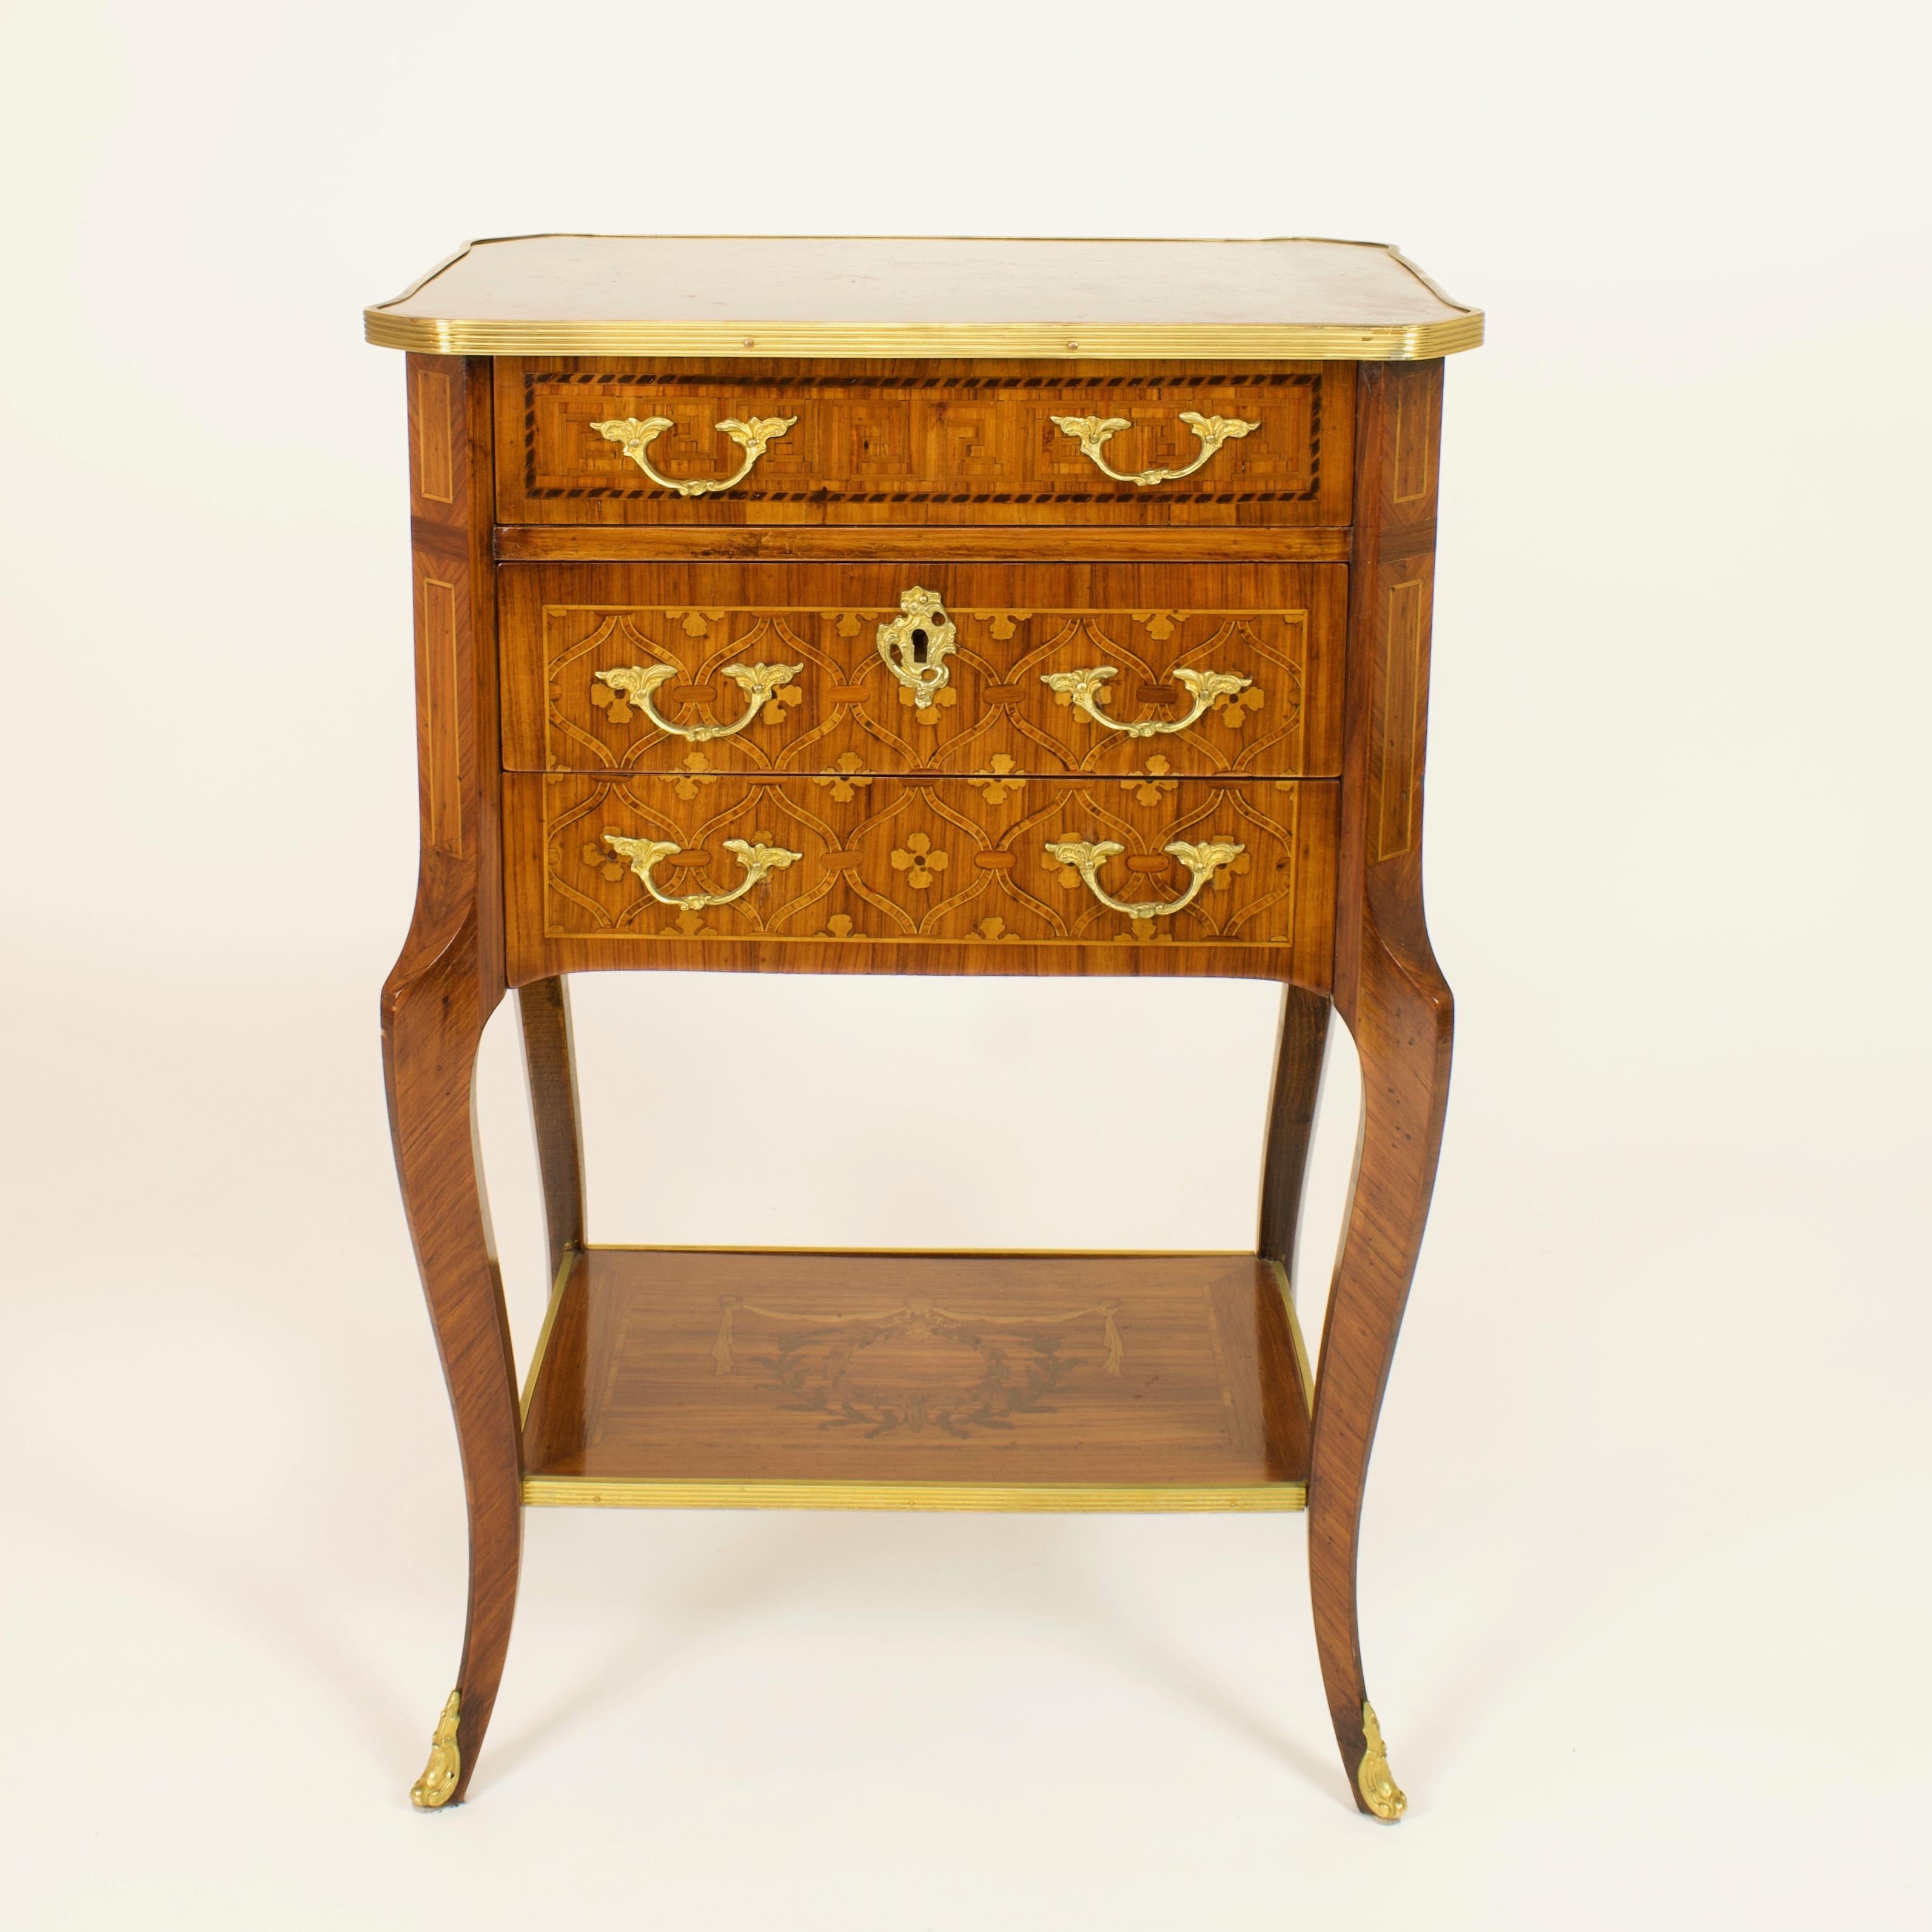 Late 19th Century French Louis XV/Transition Marquetry a la Reine side table

square table à la chiffonière with canted corners and three drawers standing on four cabriole legs, holding a stretcher with laurel wreath and drapery marquetry and gilt